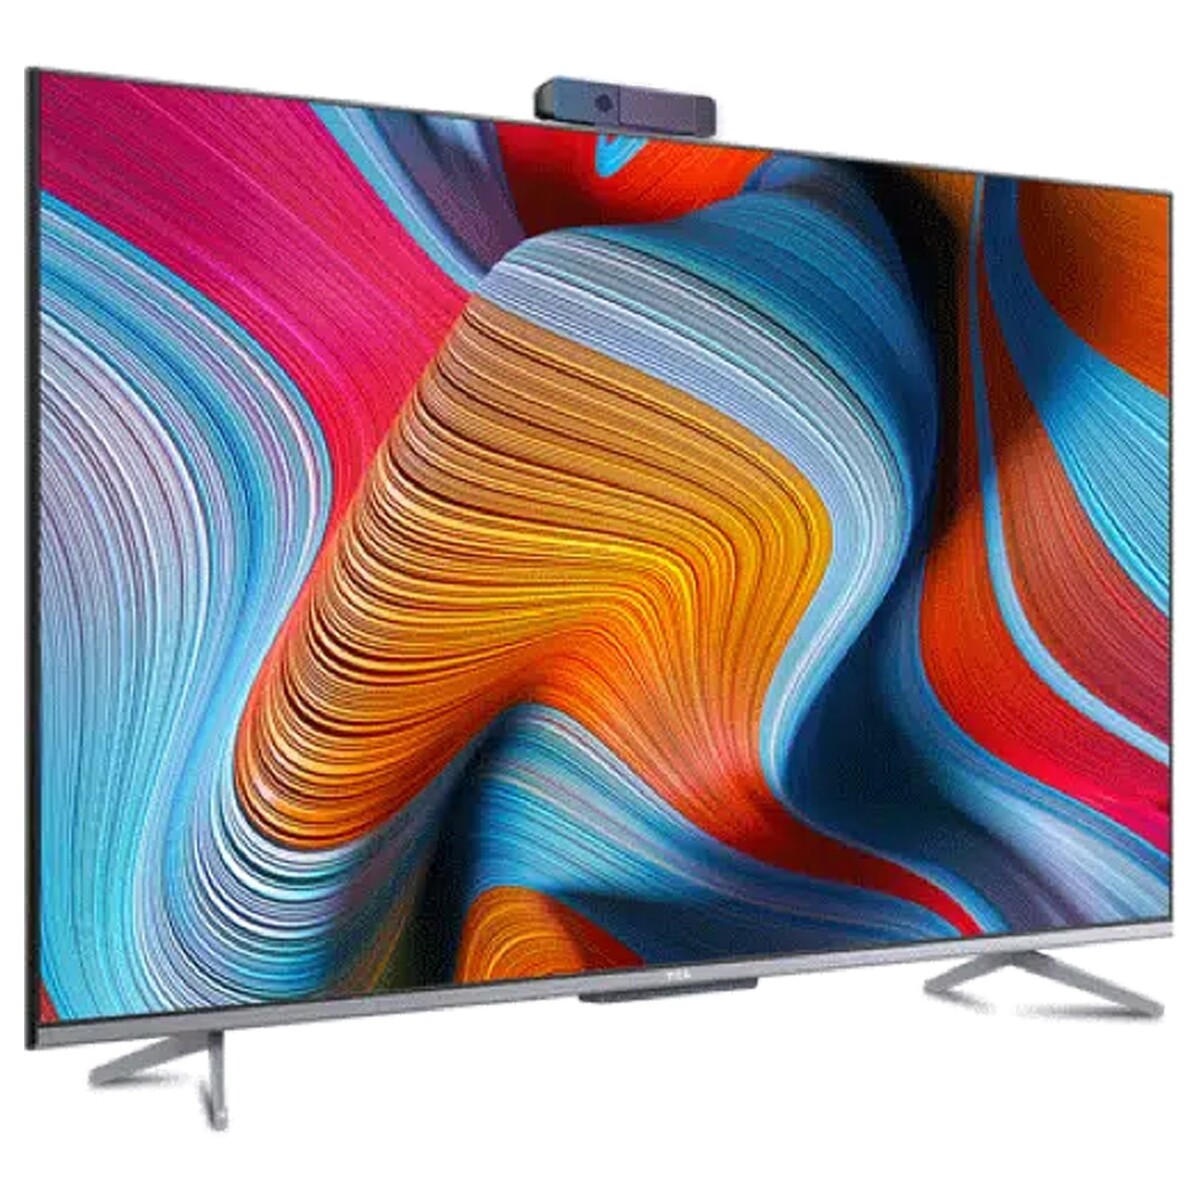 TCL 4K Ultra HD Android Smart LED TV 43P725 43"